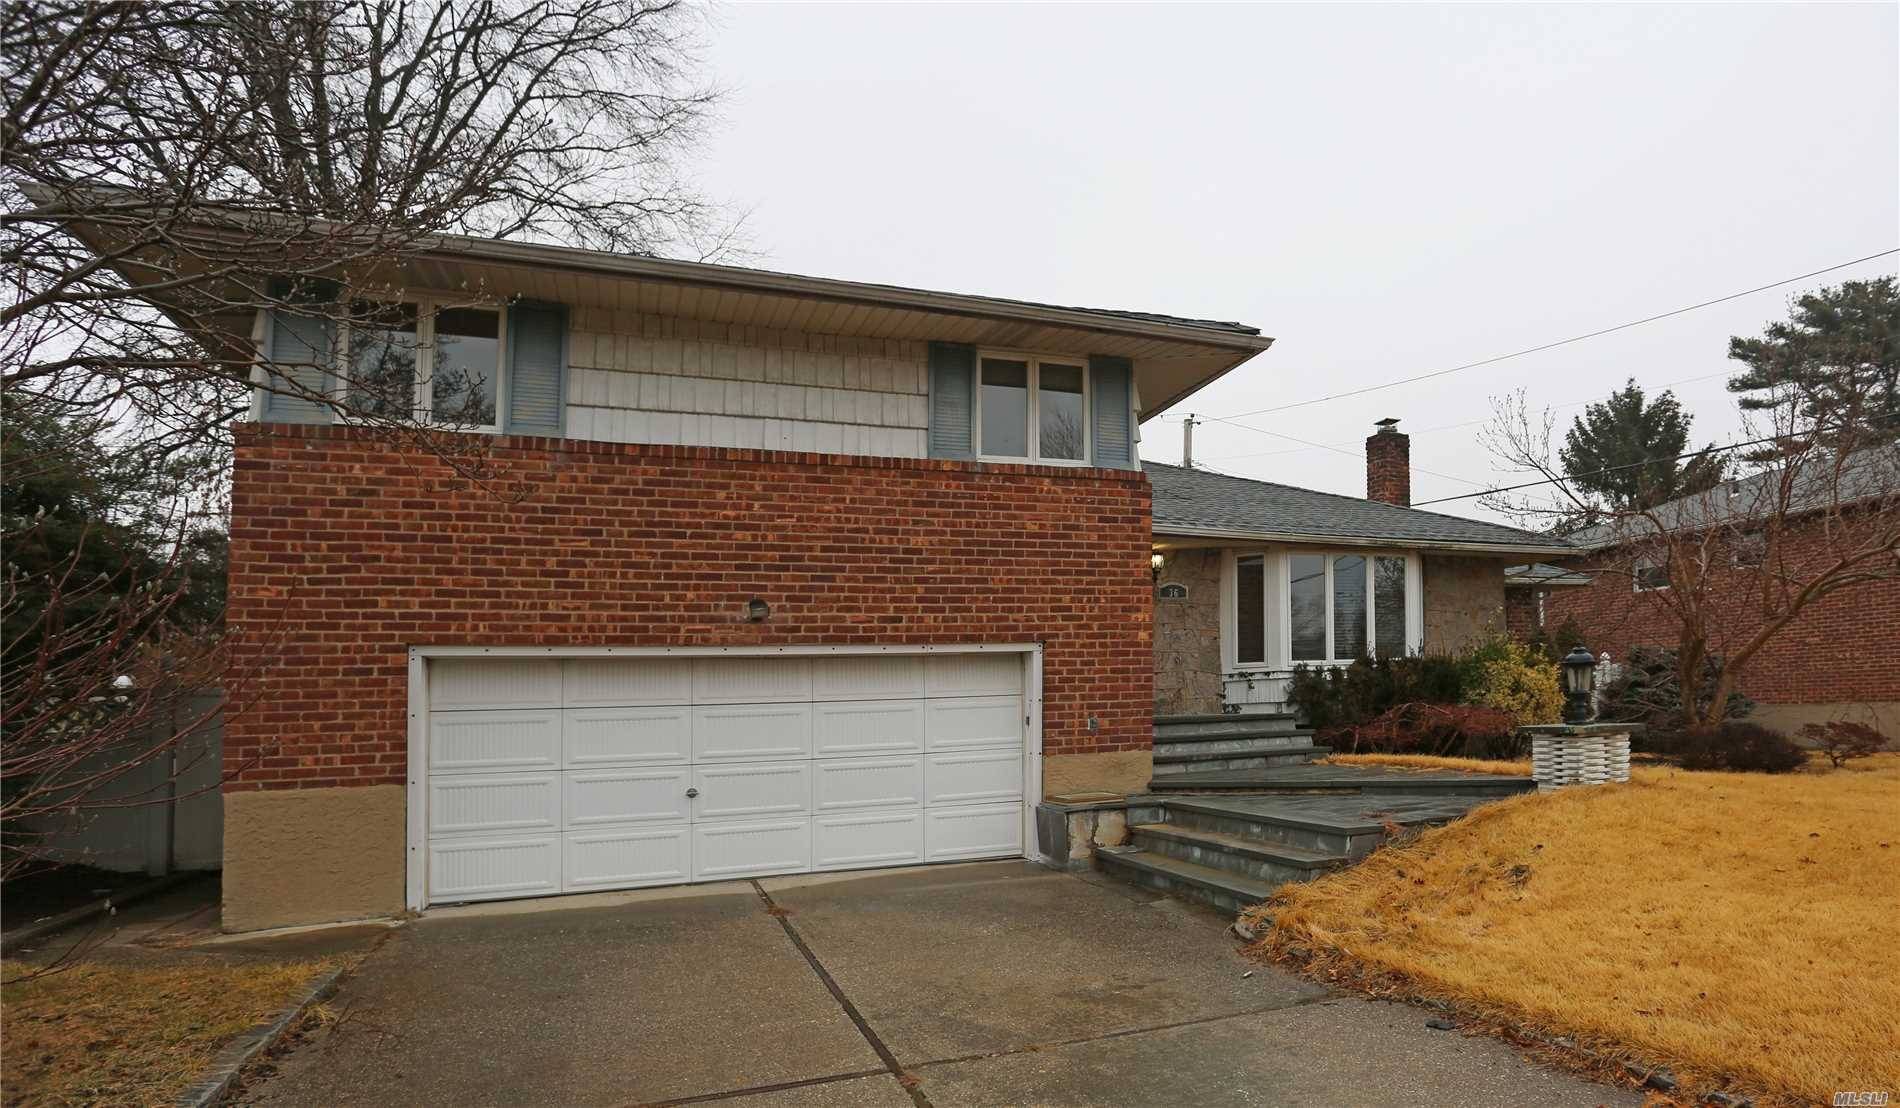 Brick, Split Home With 4 Bedrooms And 3 1 2 Baths In Birchwood Park Section.